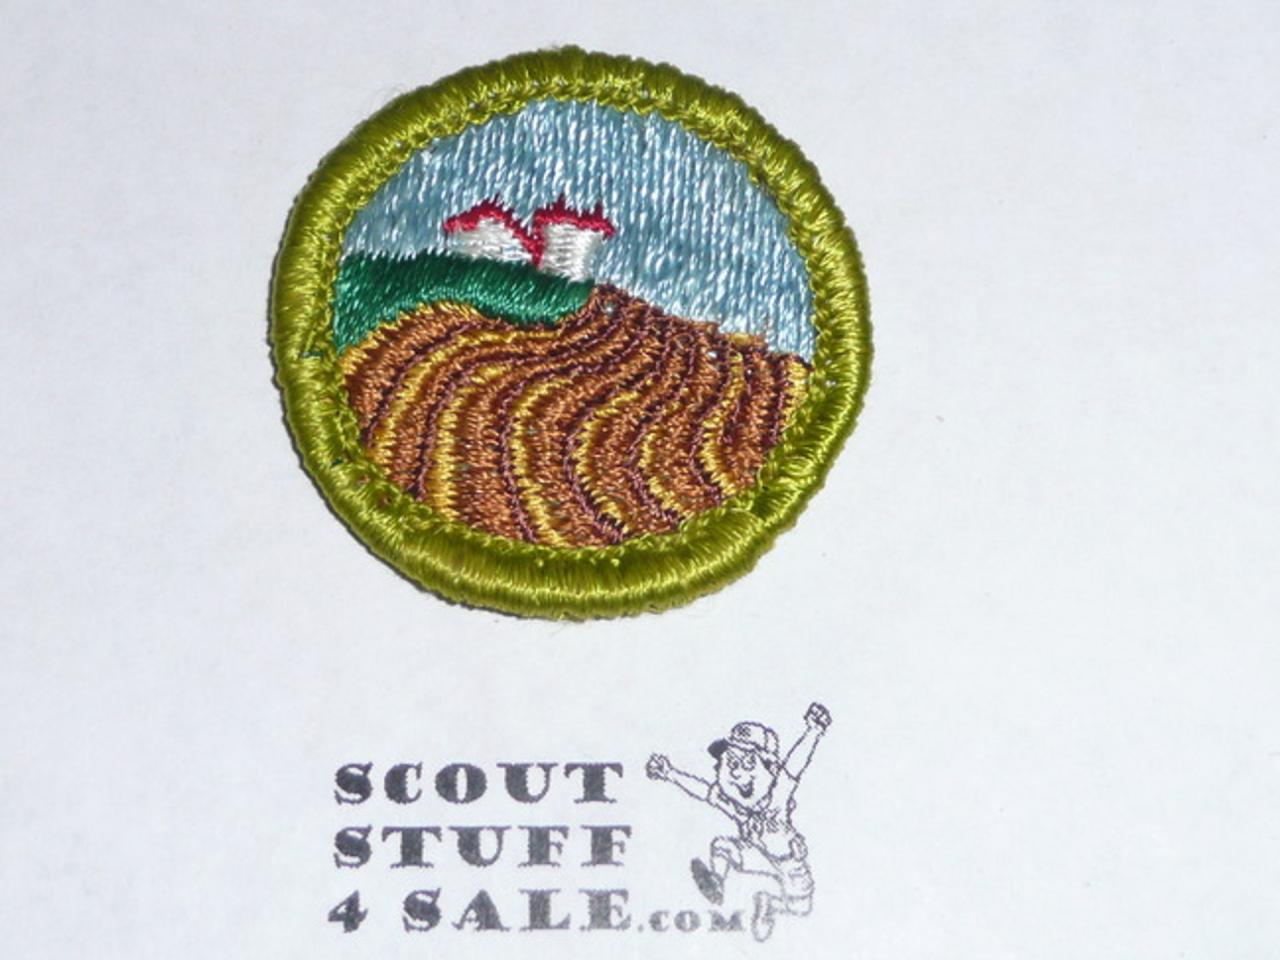 Soil and water conservation merit badge